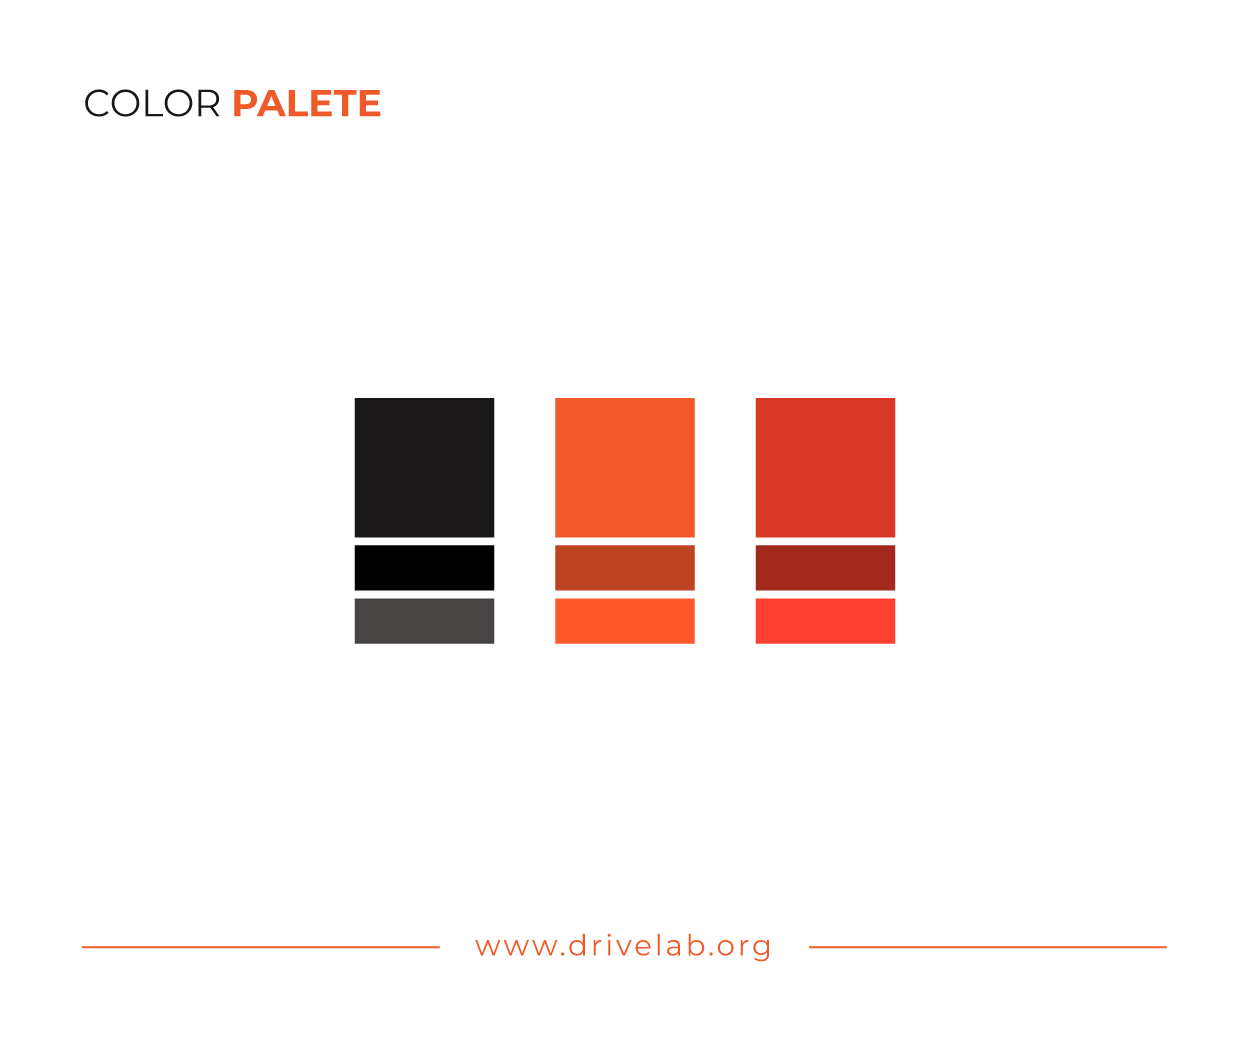 DriveLab the Design and Research of In-Vehicle Experiences Lab Color Palette Image